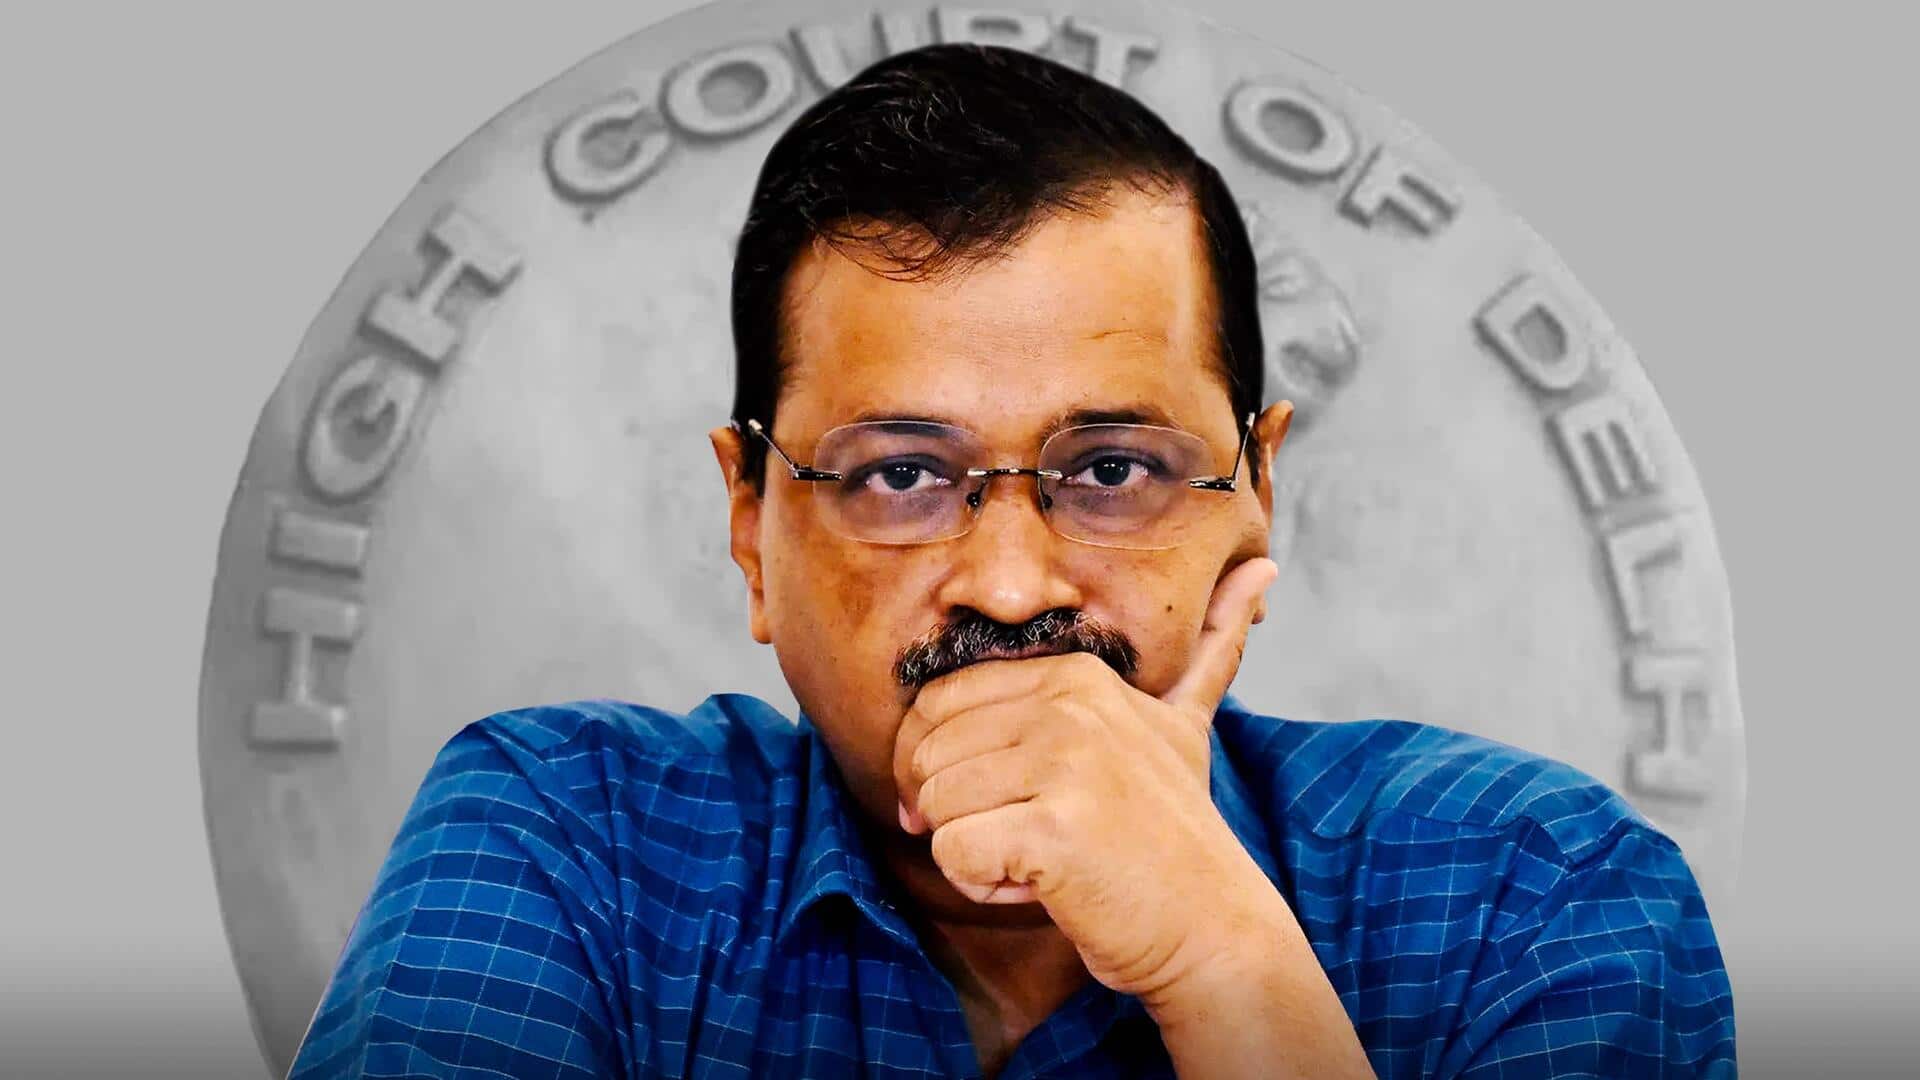 Excise policy case: Delhi court summons Kejriwal after ED's complaint